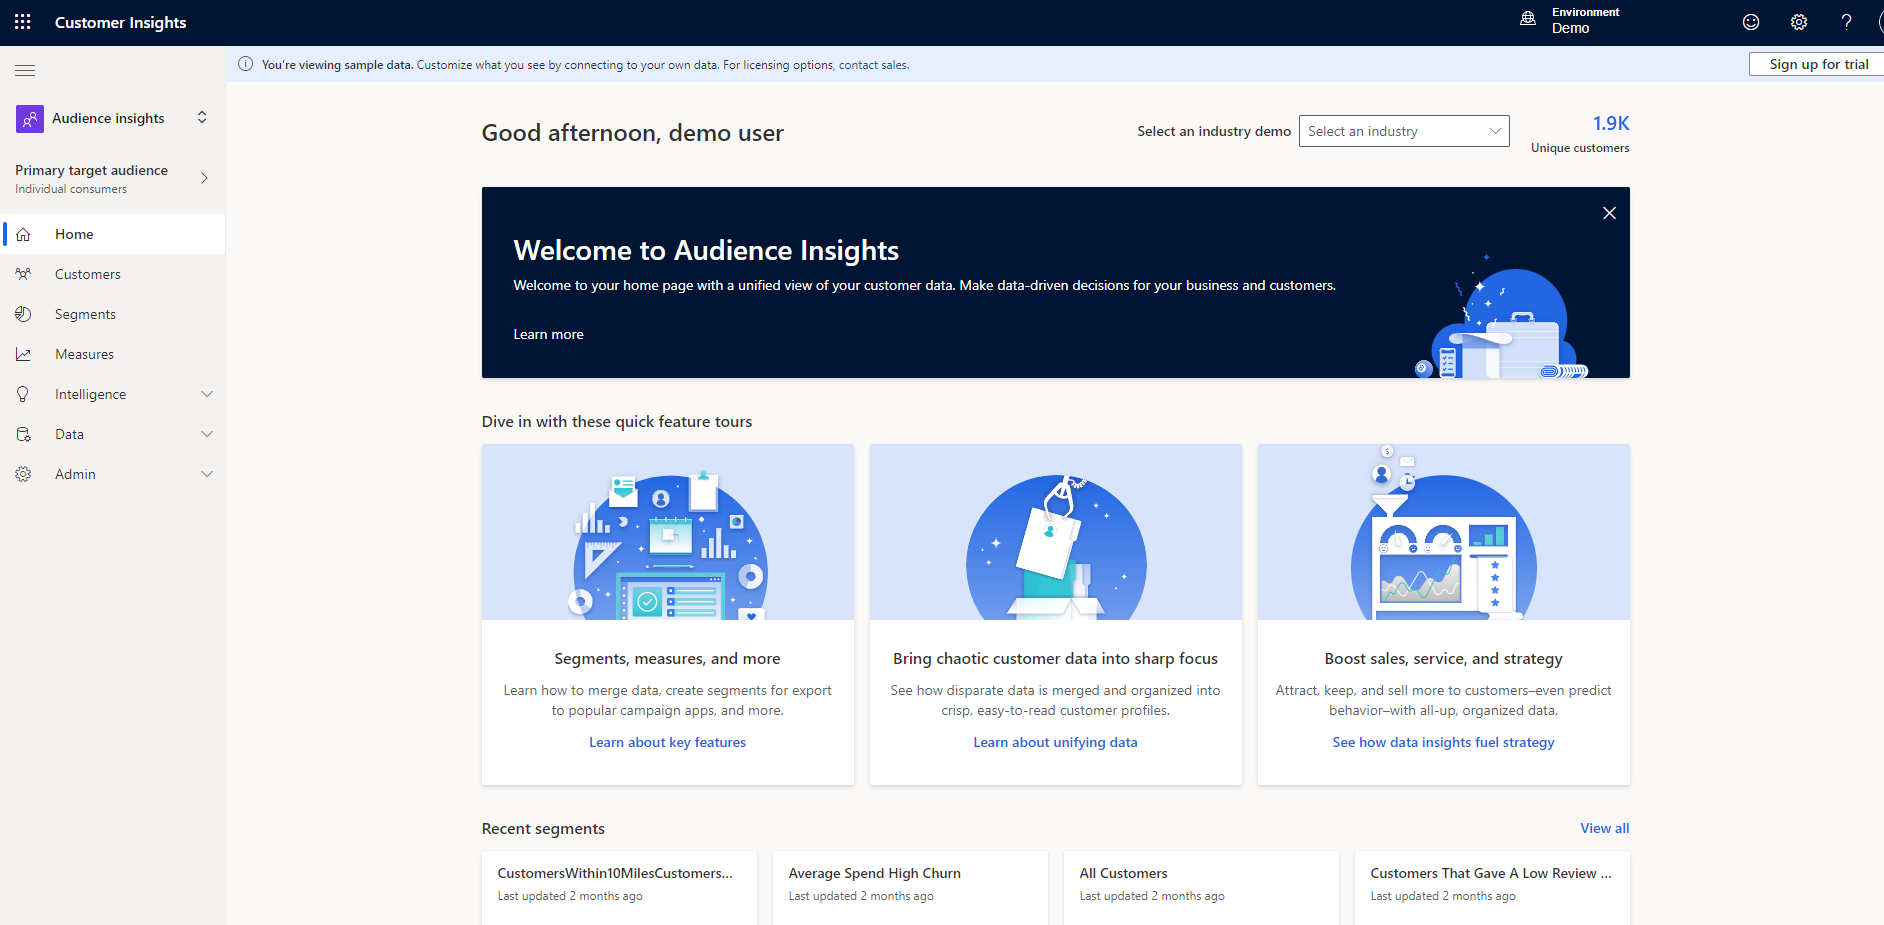 Screenshot of the Customer Insights home page.